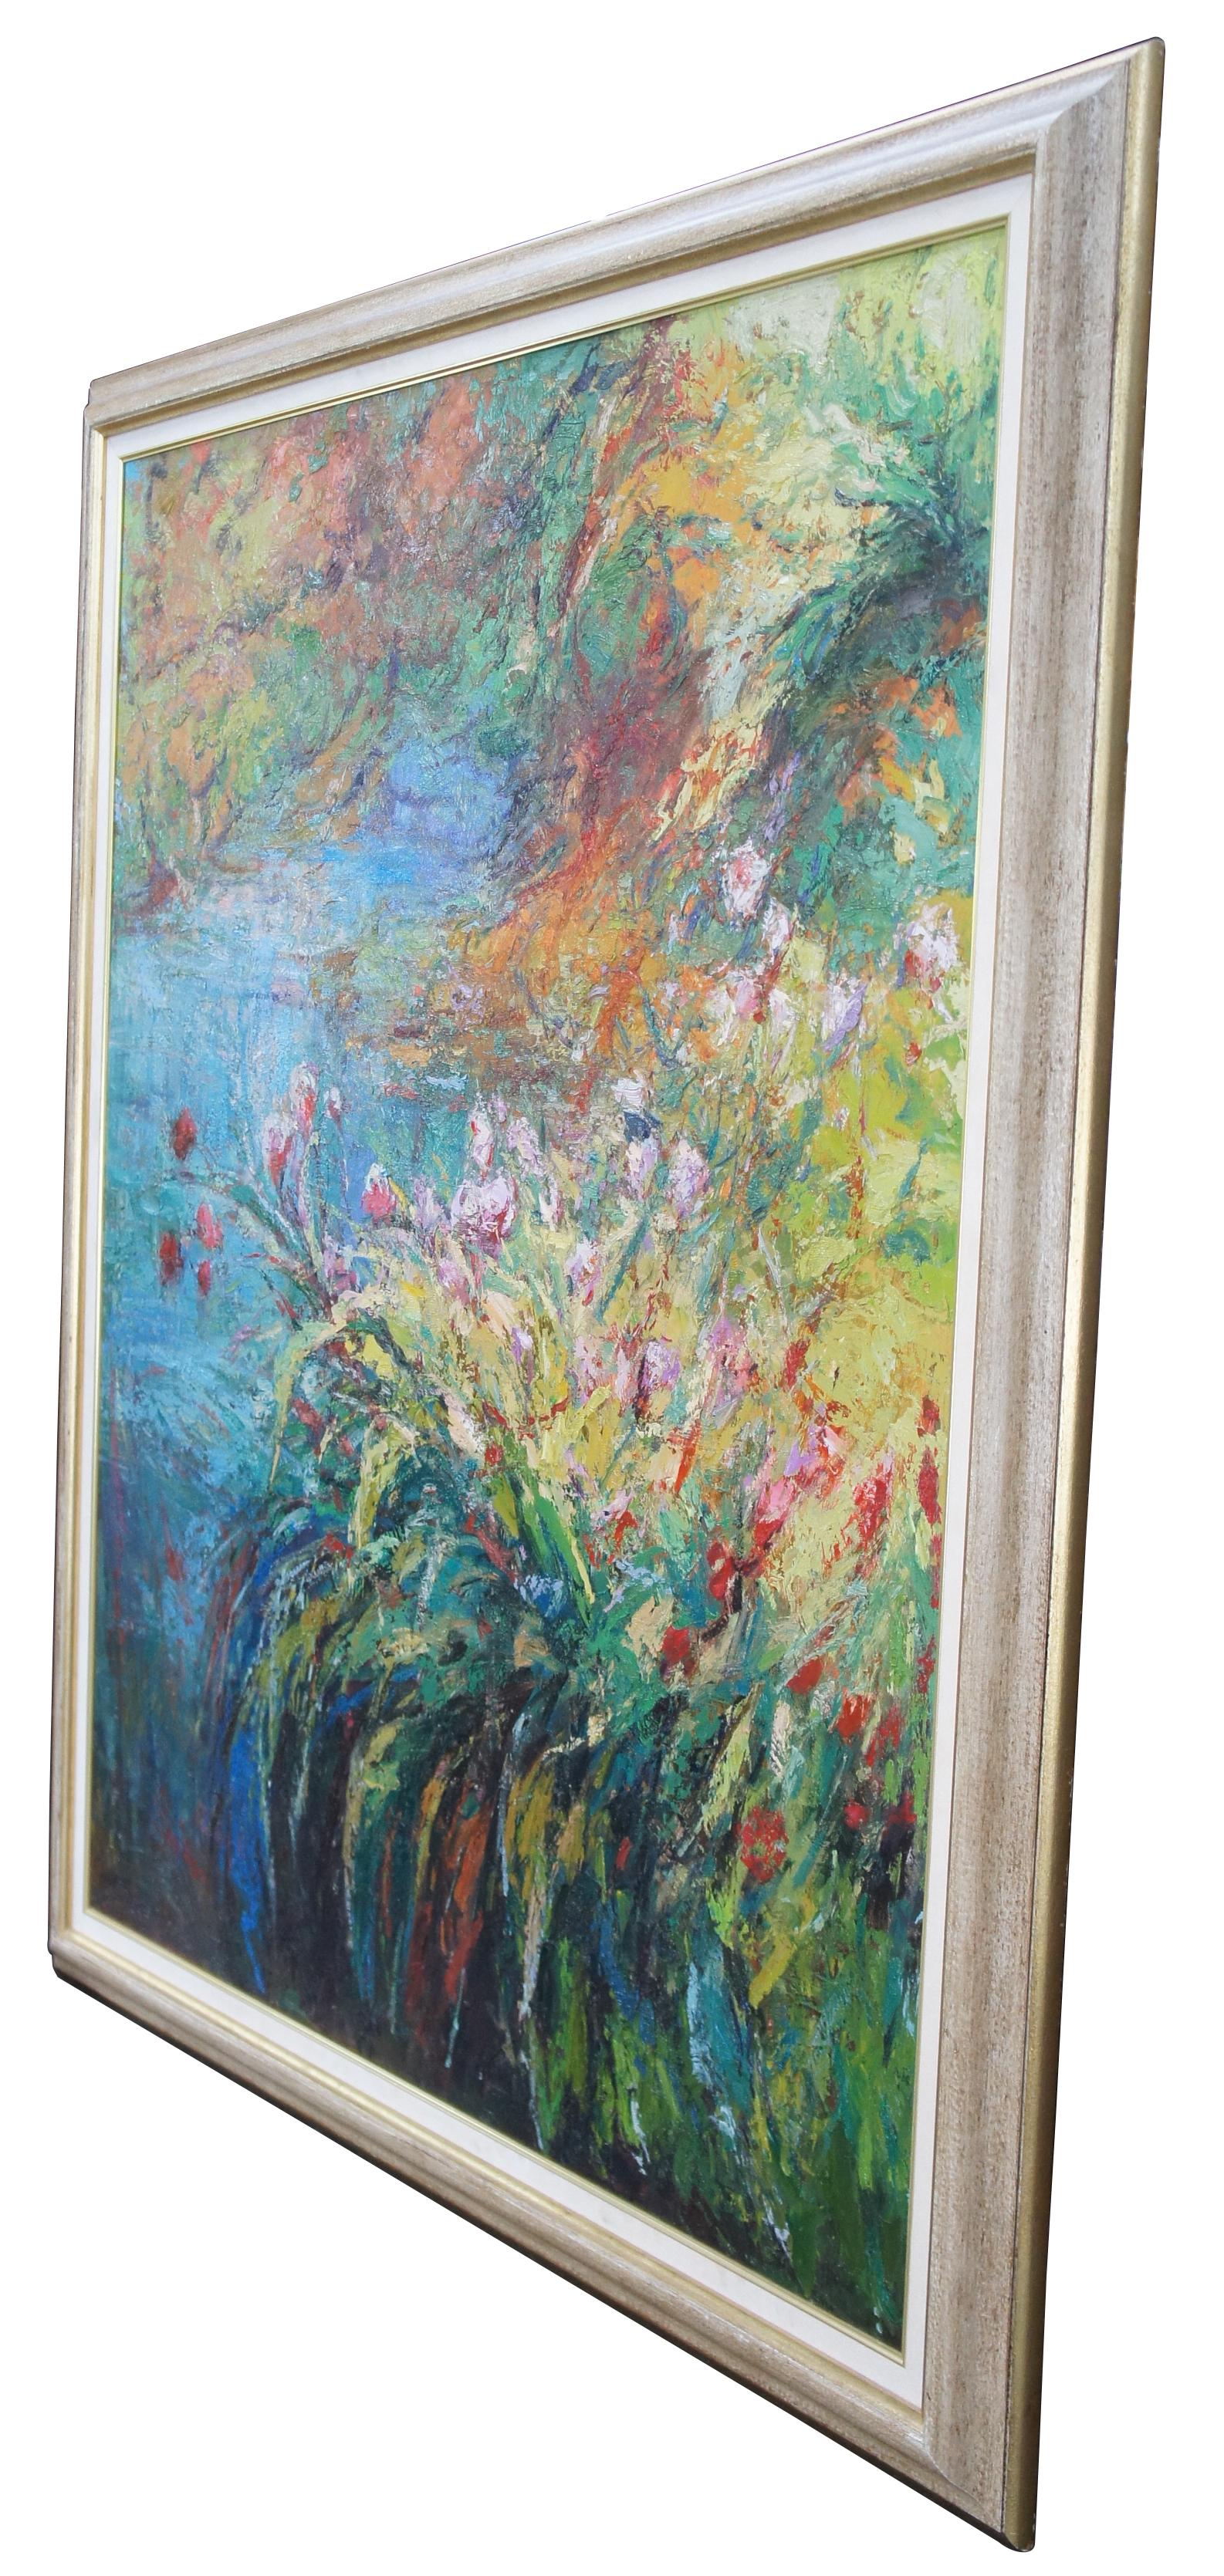 Abstract oil painting of a colorful river landscape with floring flowers. Signed lower left.

Measures: 56